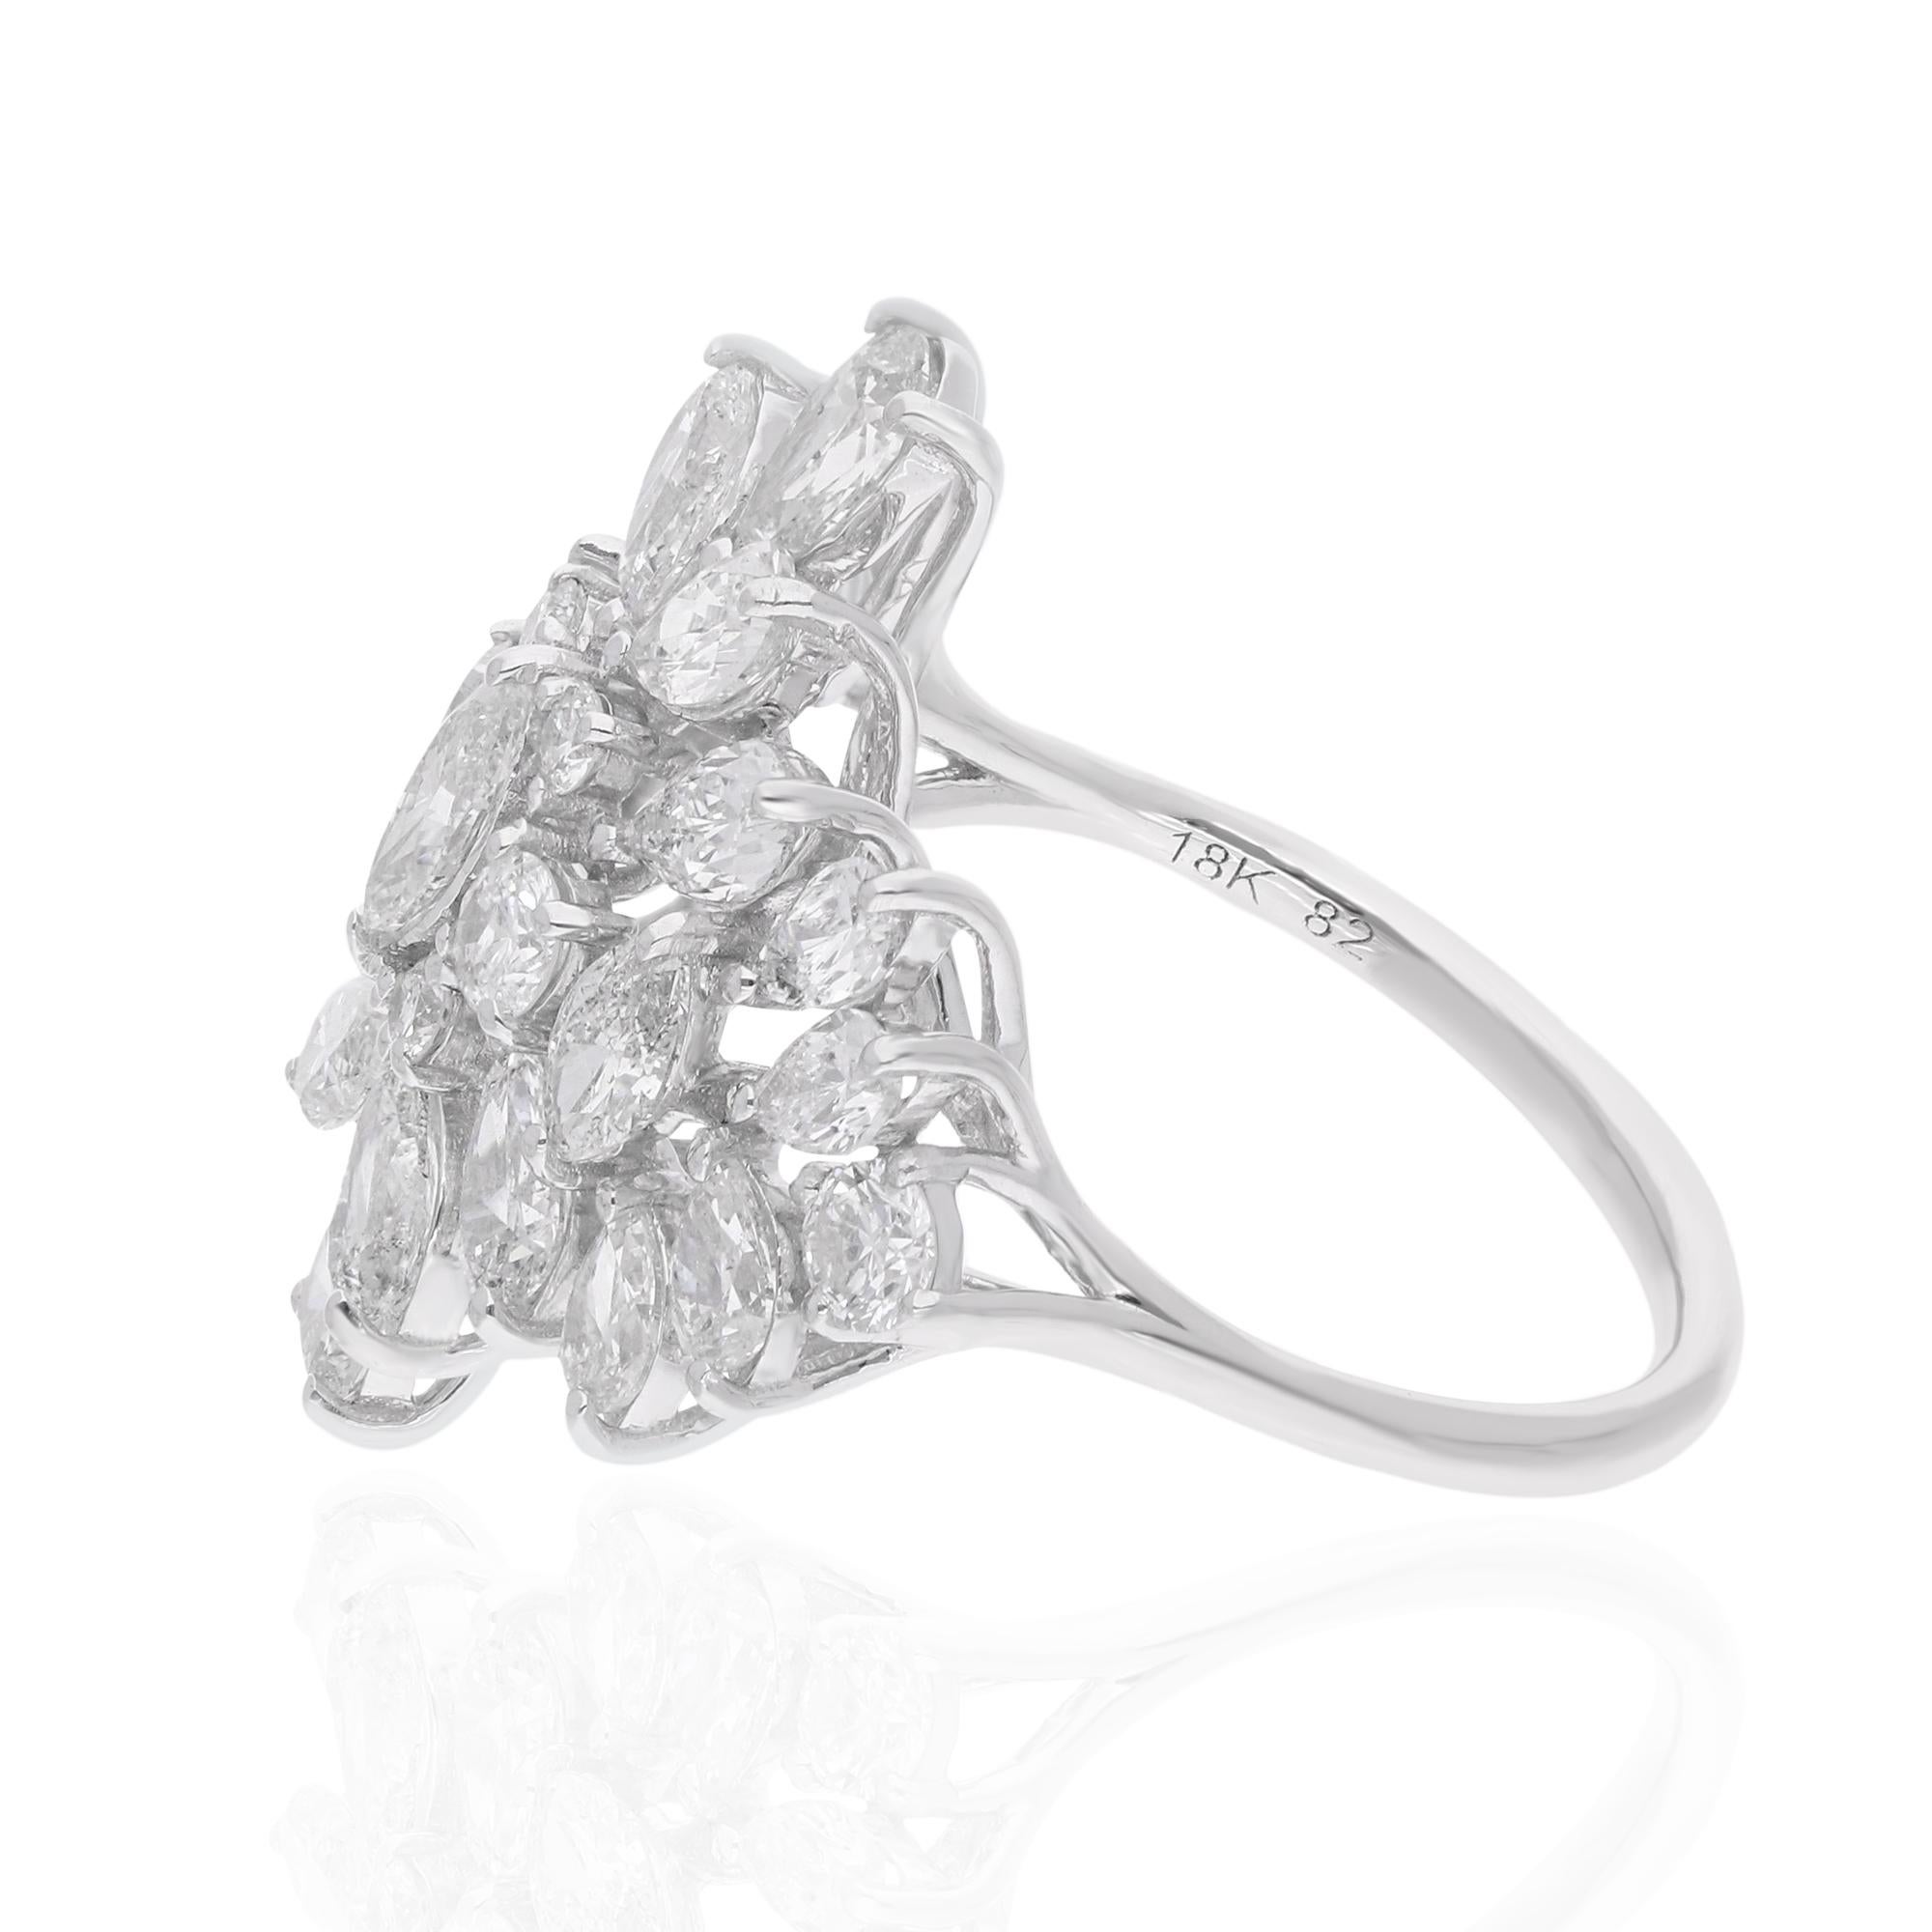 The centerpiece of this ring is the striking marquise diamond, flanked by two pear-shaped diamonds on either side, creating a mesmerizing display of brilliance and glamour. Each diamond is meticulously selected for its exceptional quality and